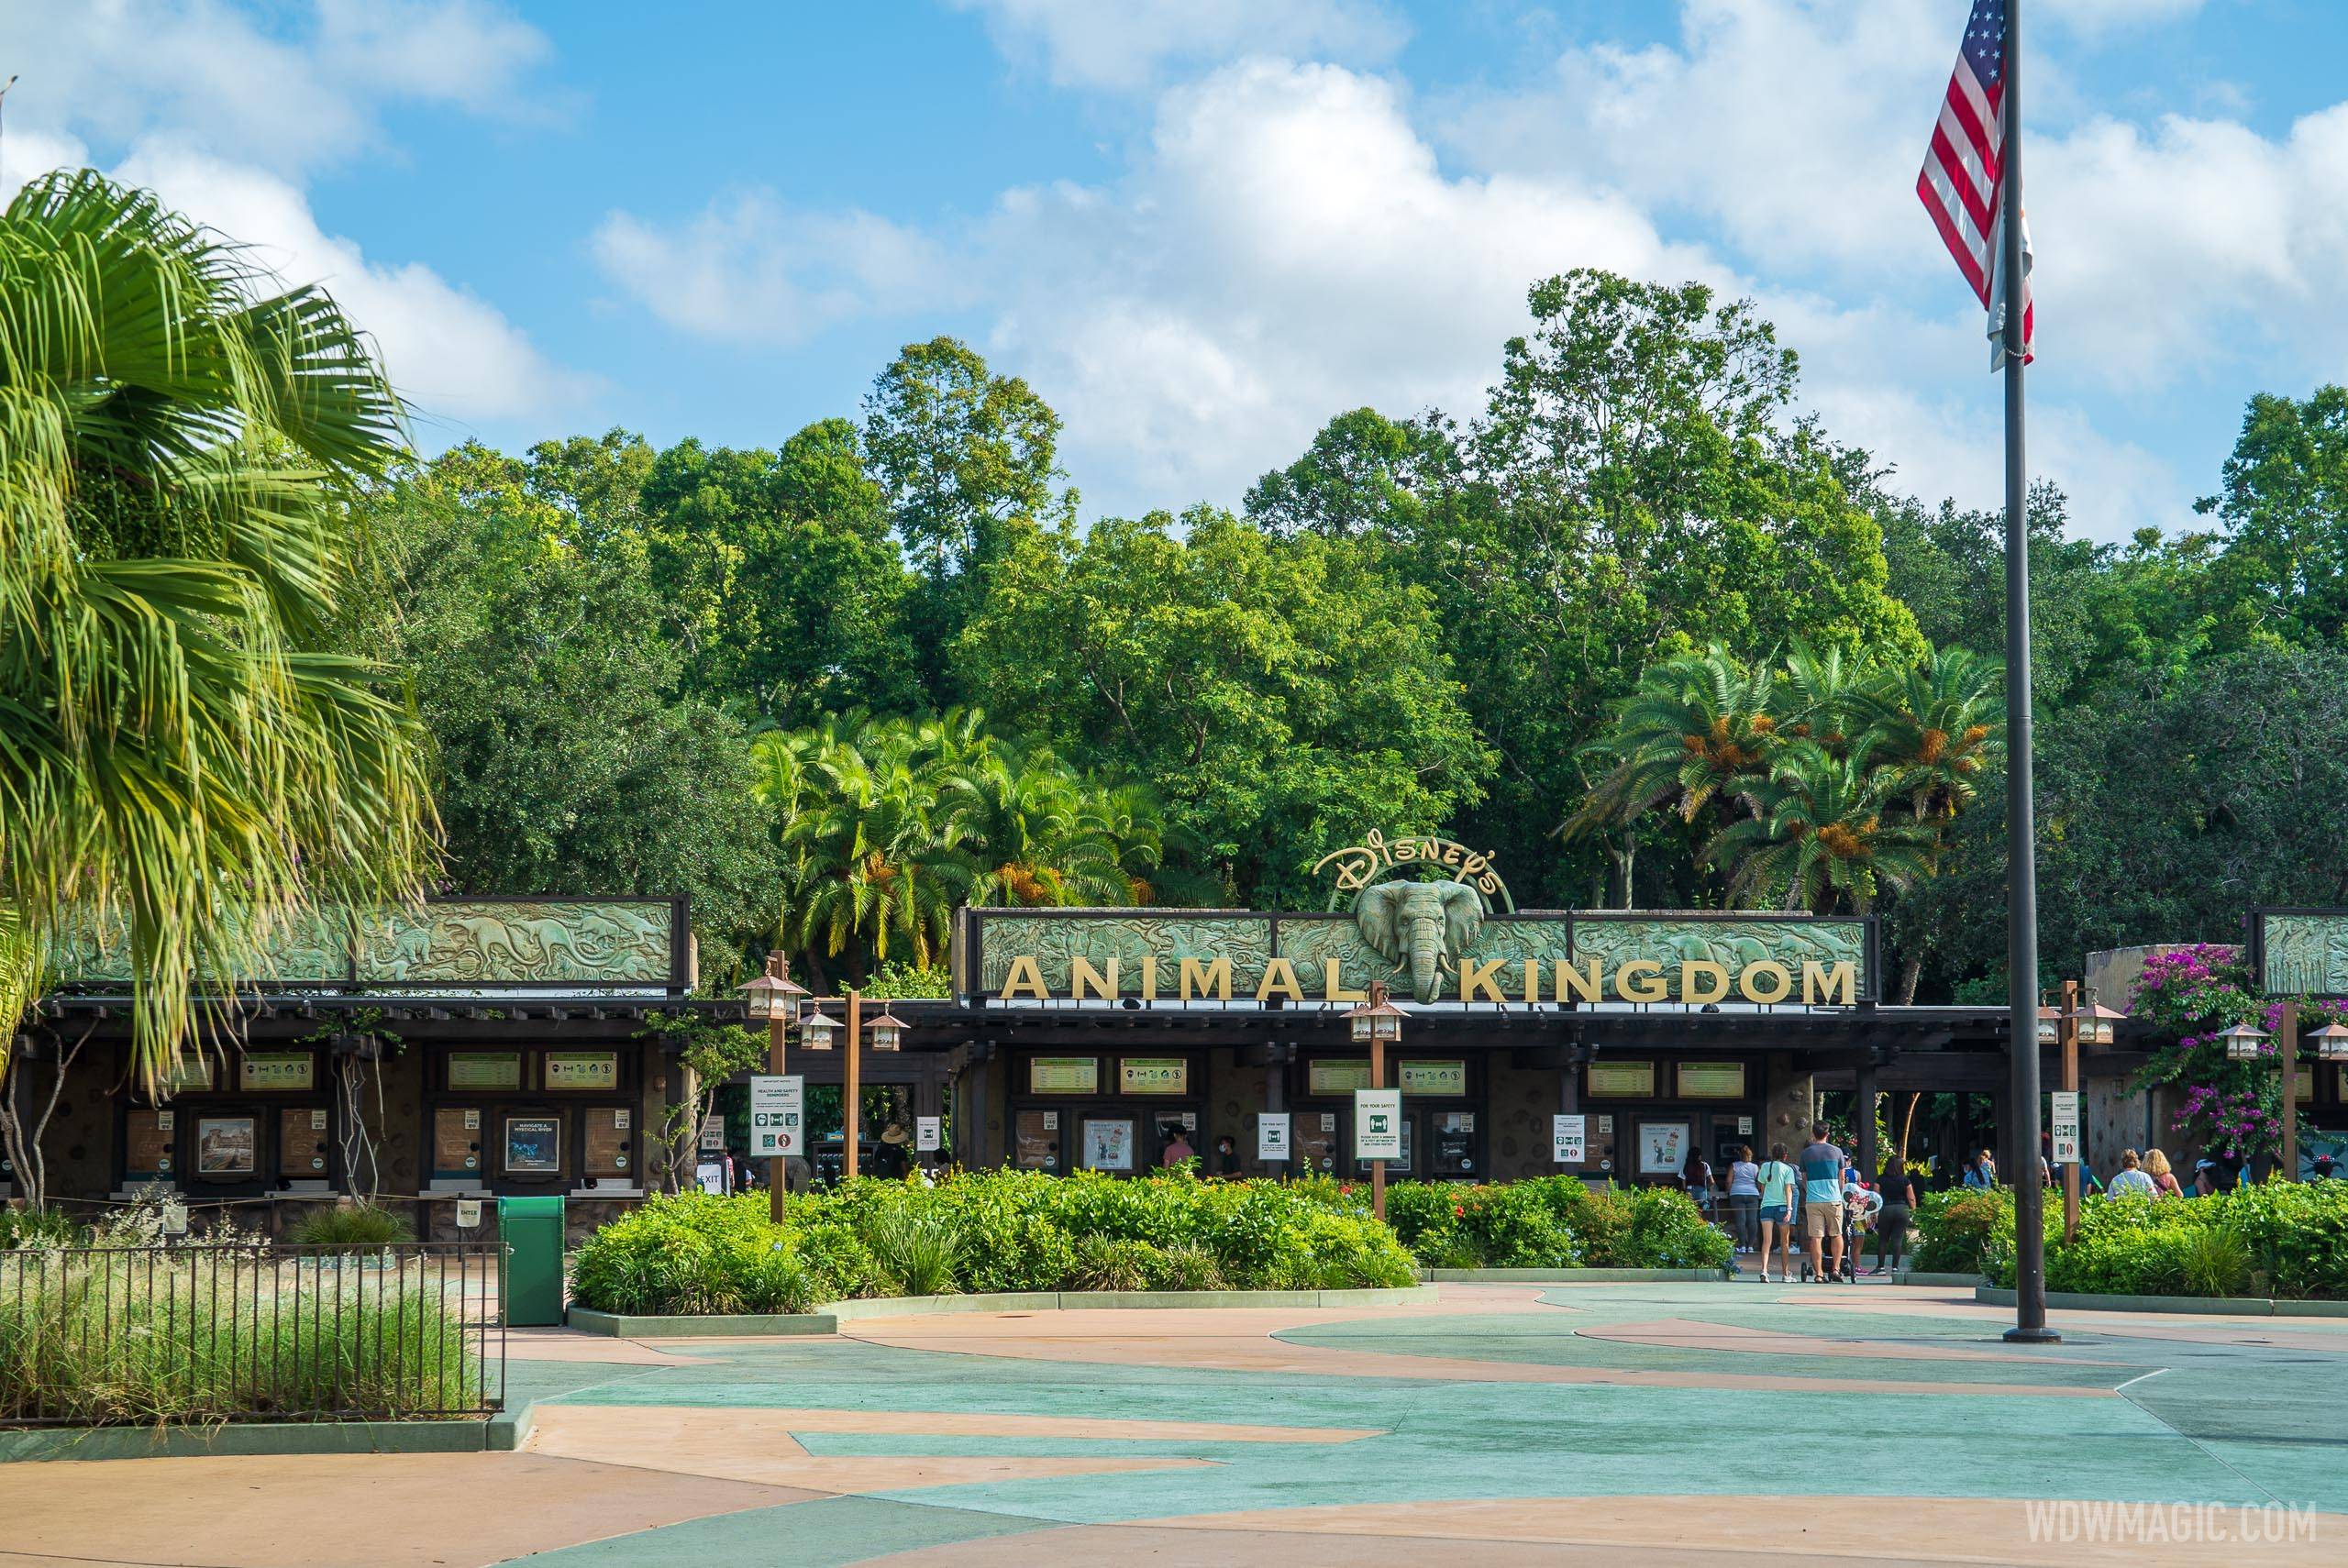 Cast Members can once again visit Disney's Animal Kingdom